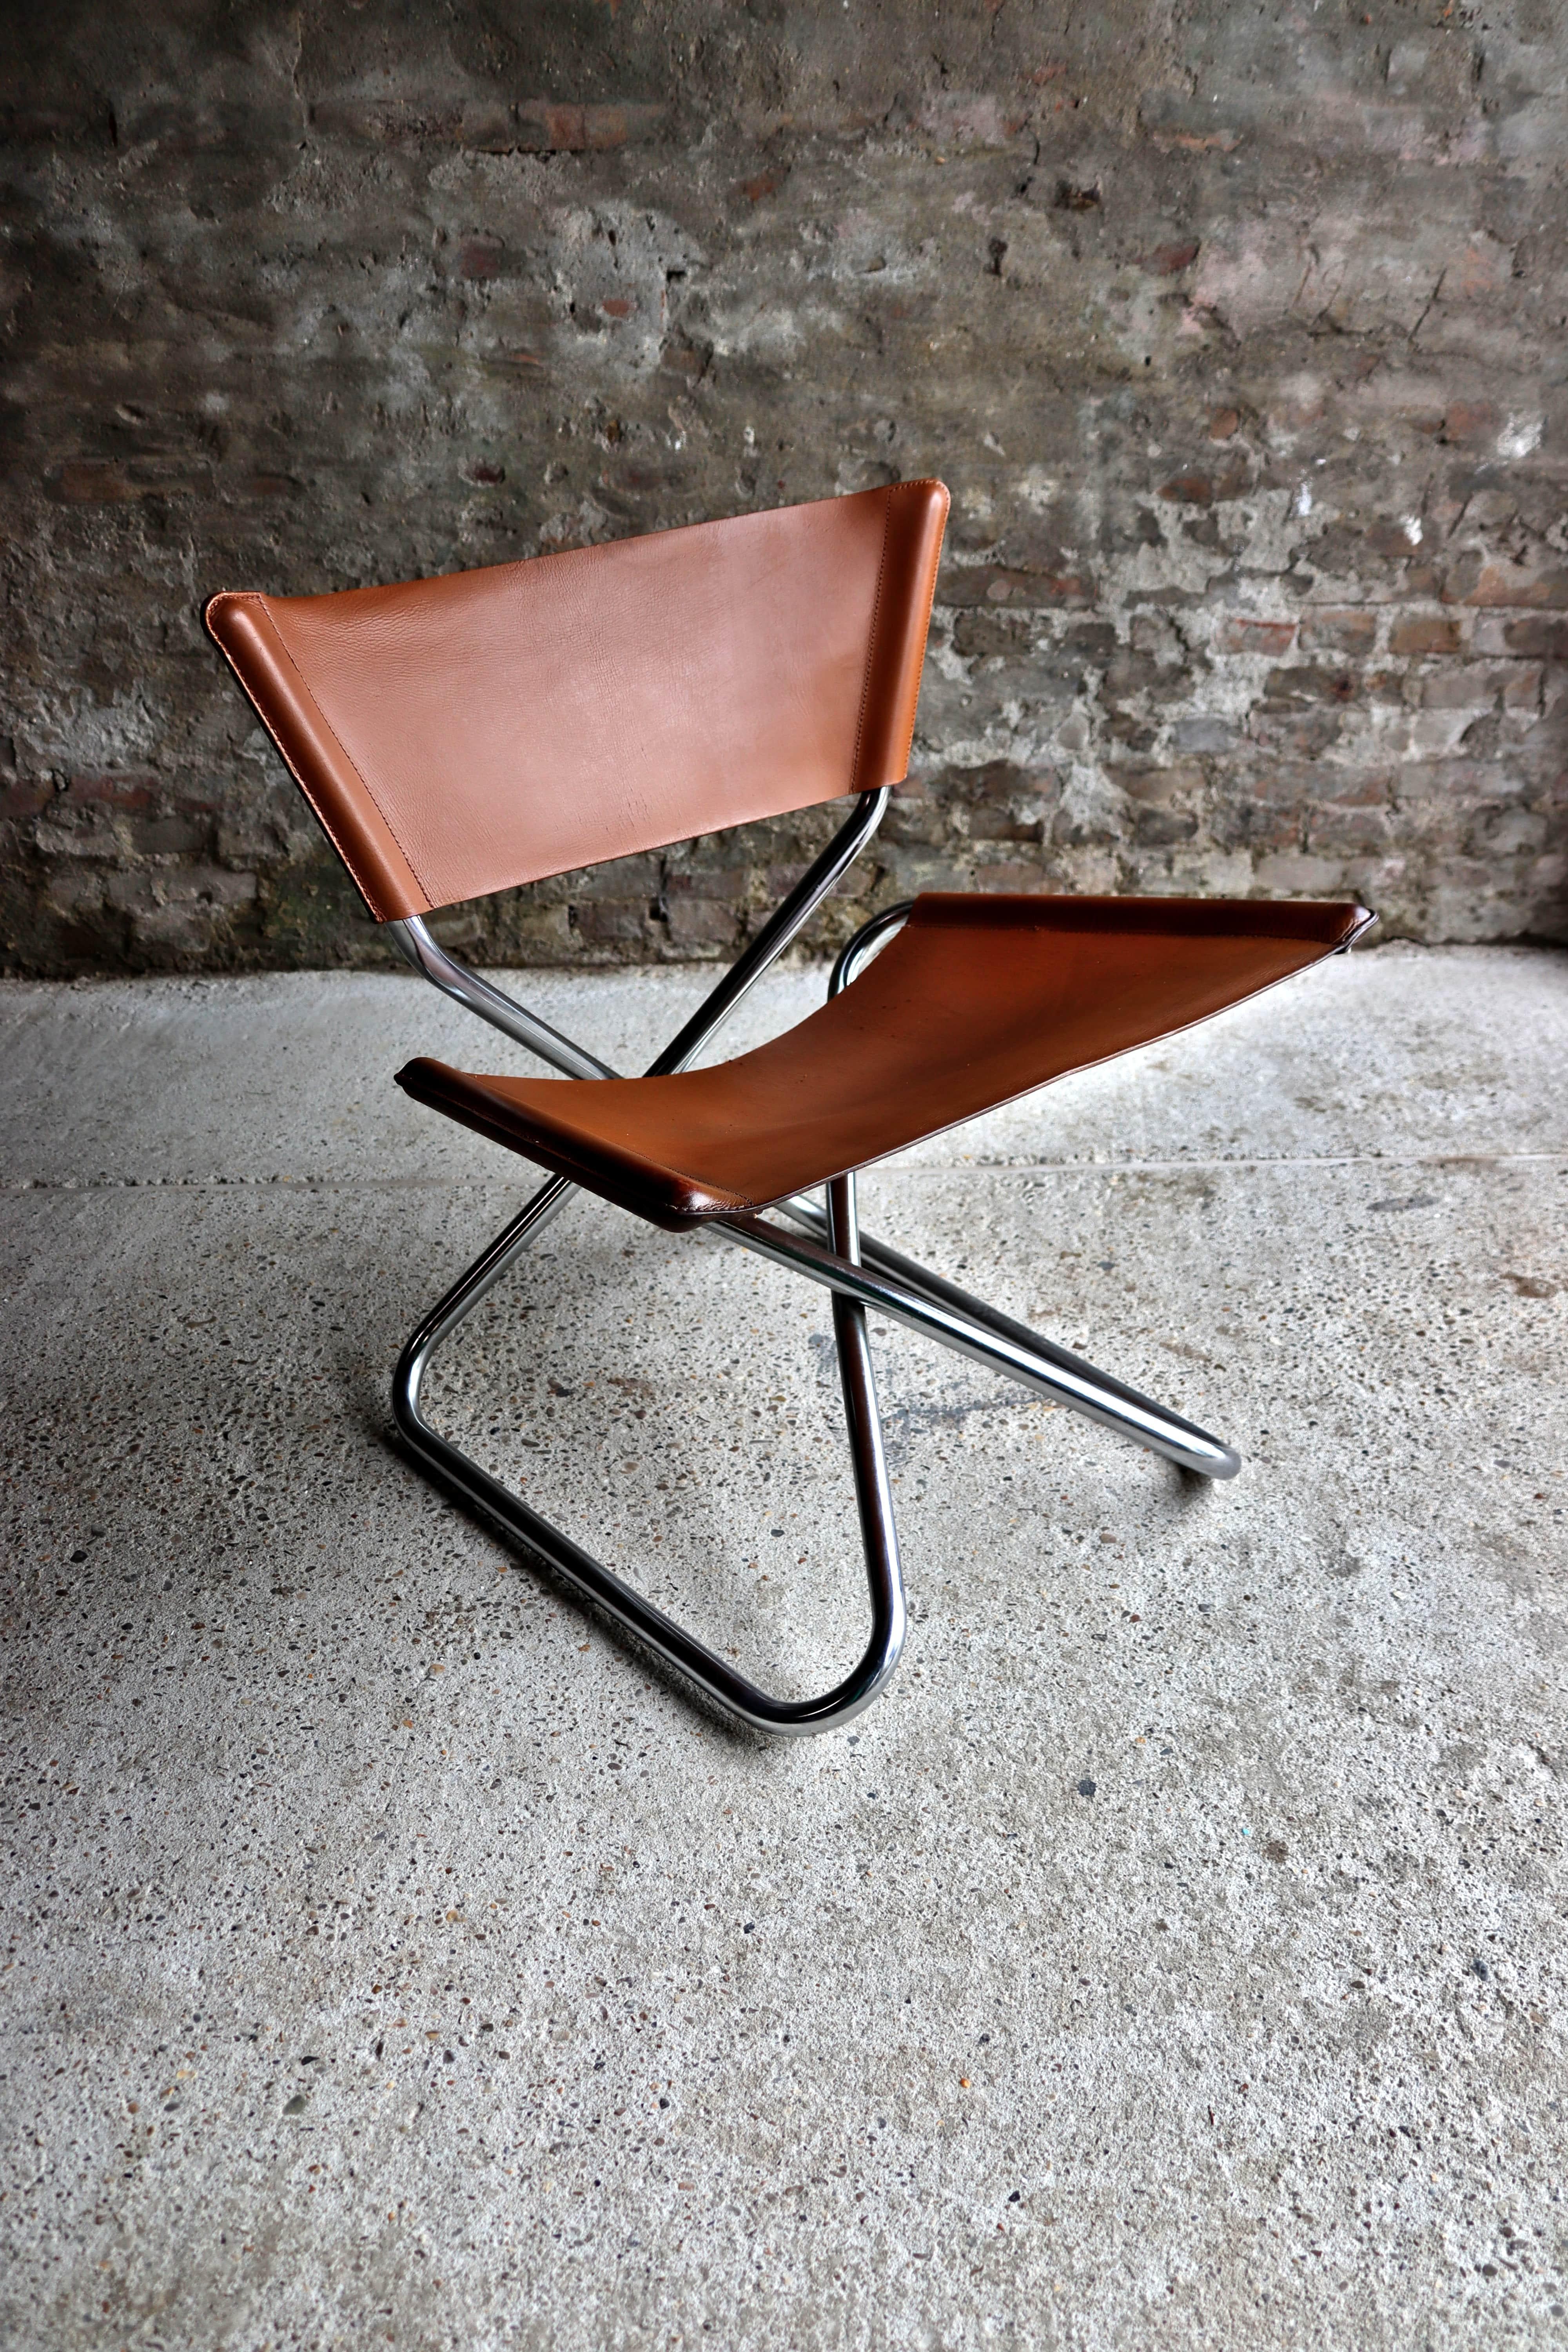 This ultra rare chair is called Z-Down and is designed by Erik Magnussen for Torben Ørskov. Denmark, c1968. This chair is still completely in original condition. It’s in good condition. The leather is well maintained, but it showing signs of age and